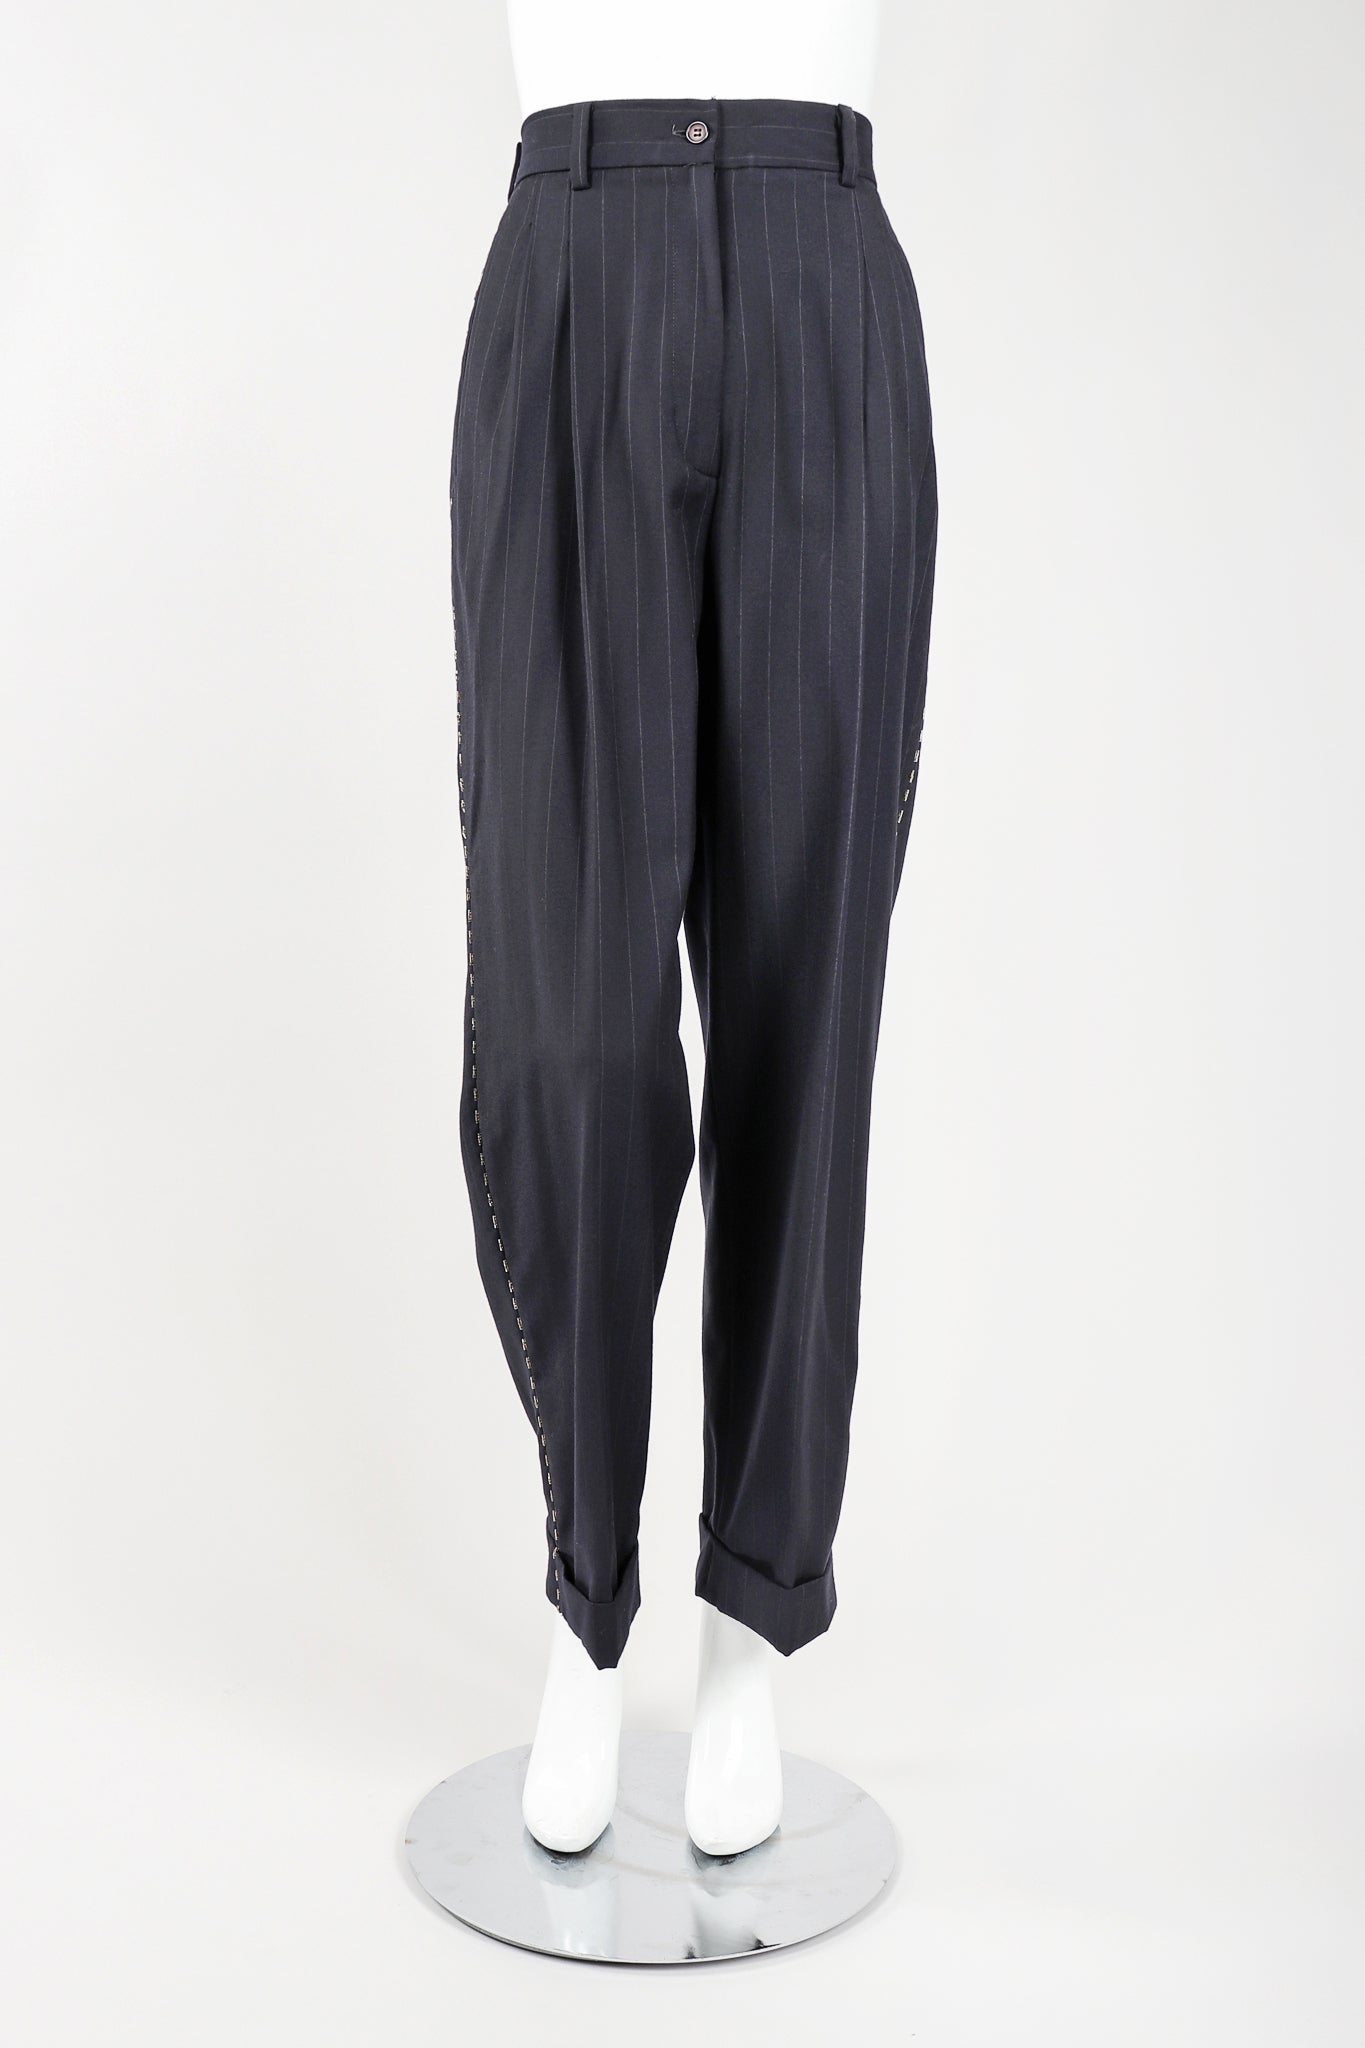 Recess Vintage Dolce & Gabbana charcoal Pinstripe Pant on mannequin, front